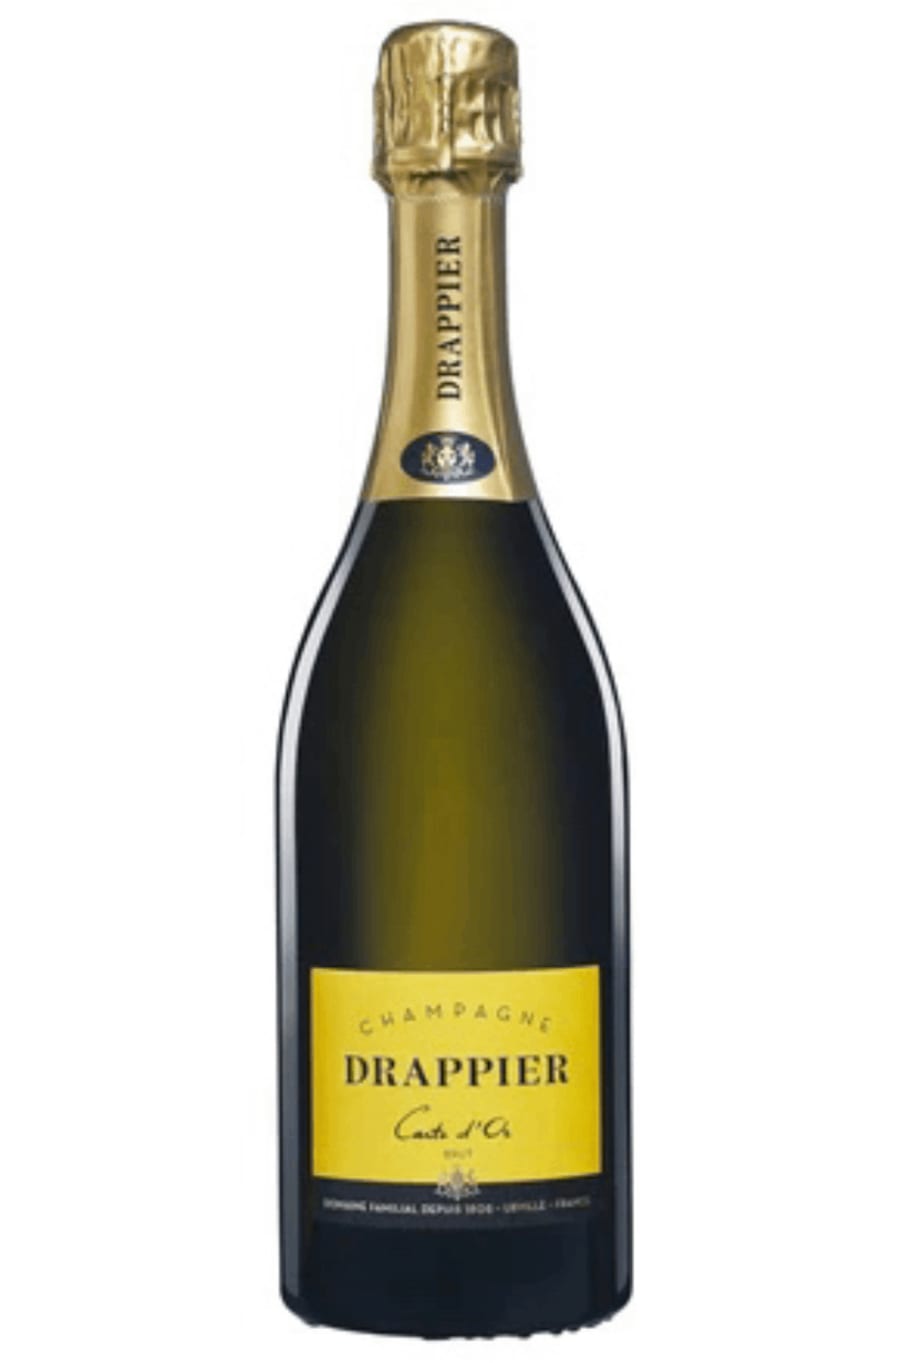 Champagne Drappier Carte d'Or Brut 750 ml